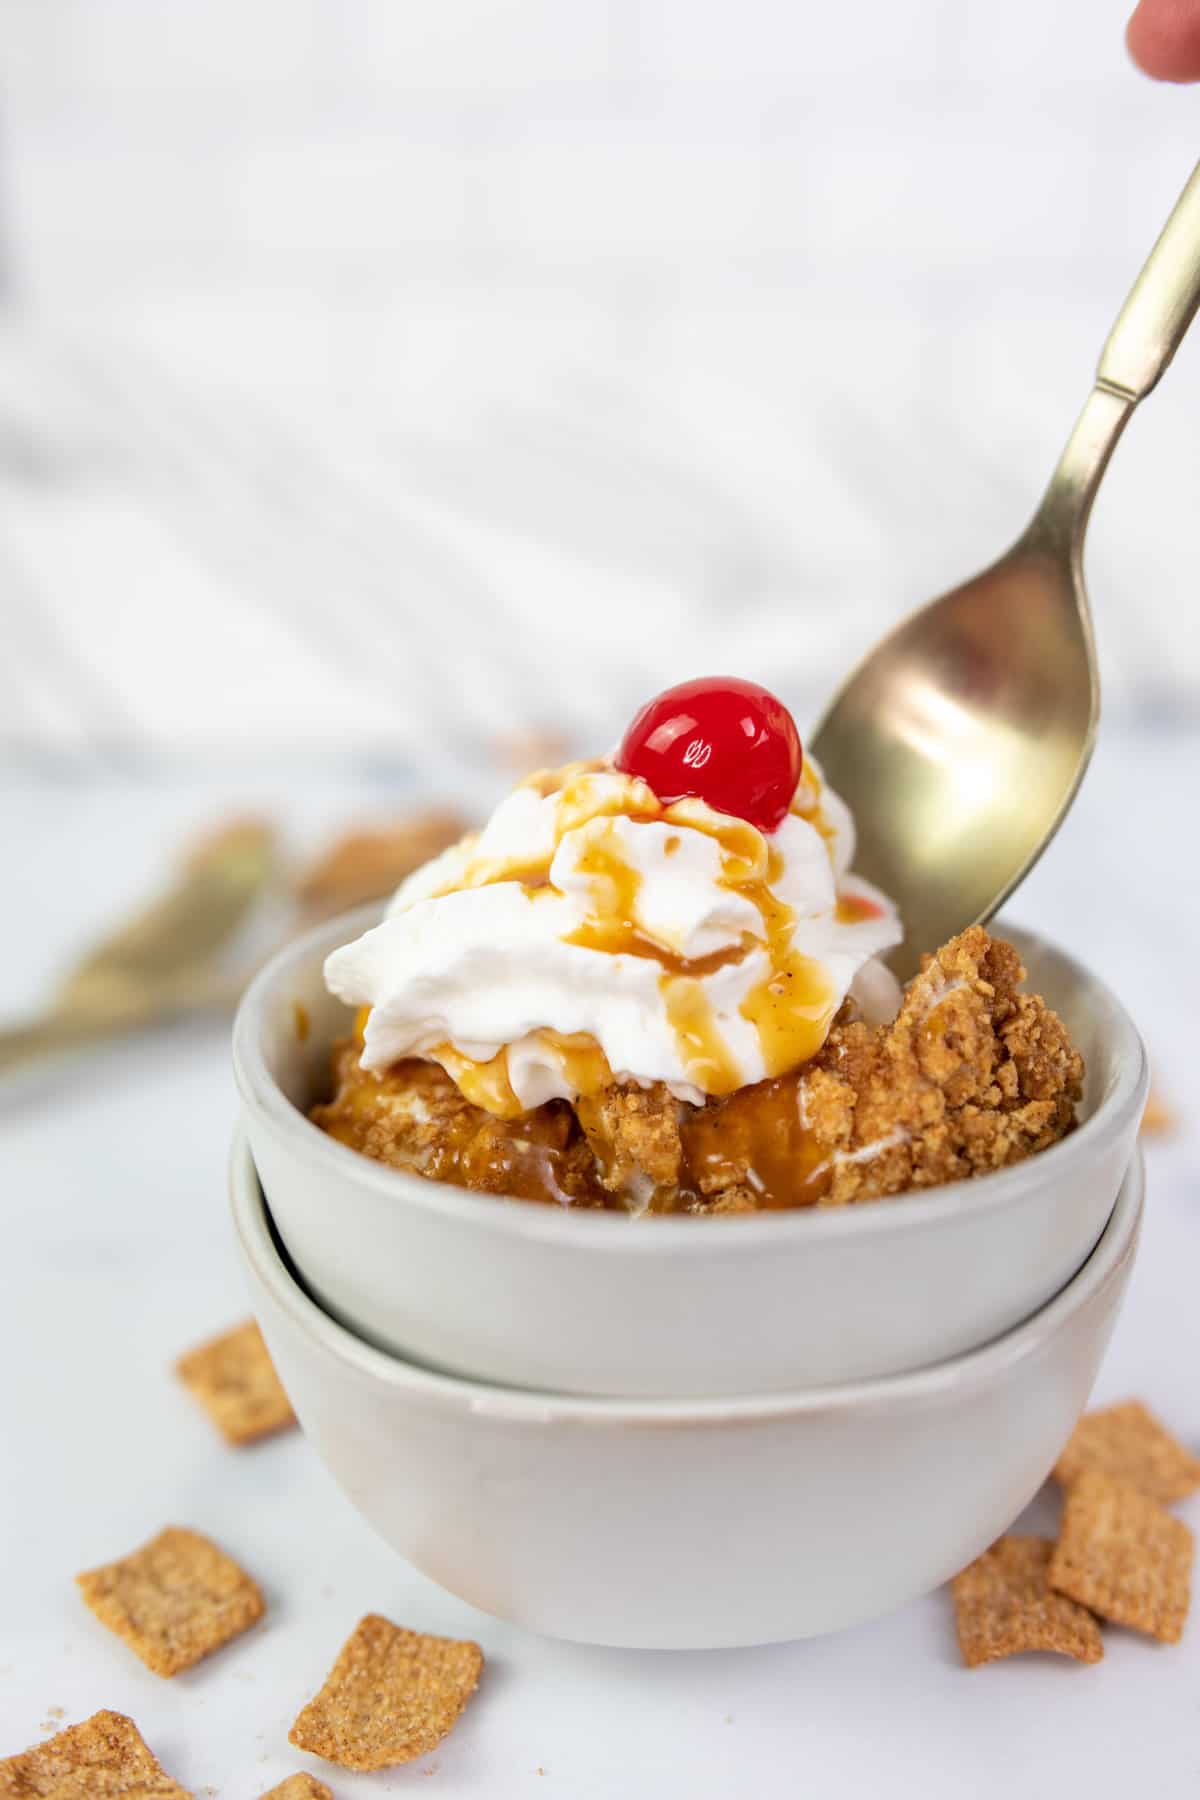 Air Fryer Fried Ice Cream (2 Ingredients!) - The Soccer Mom Blog